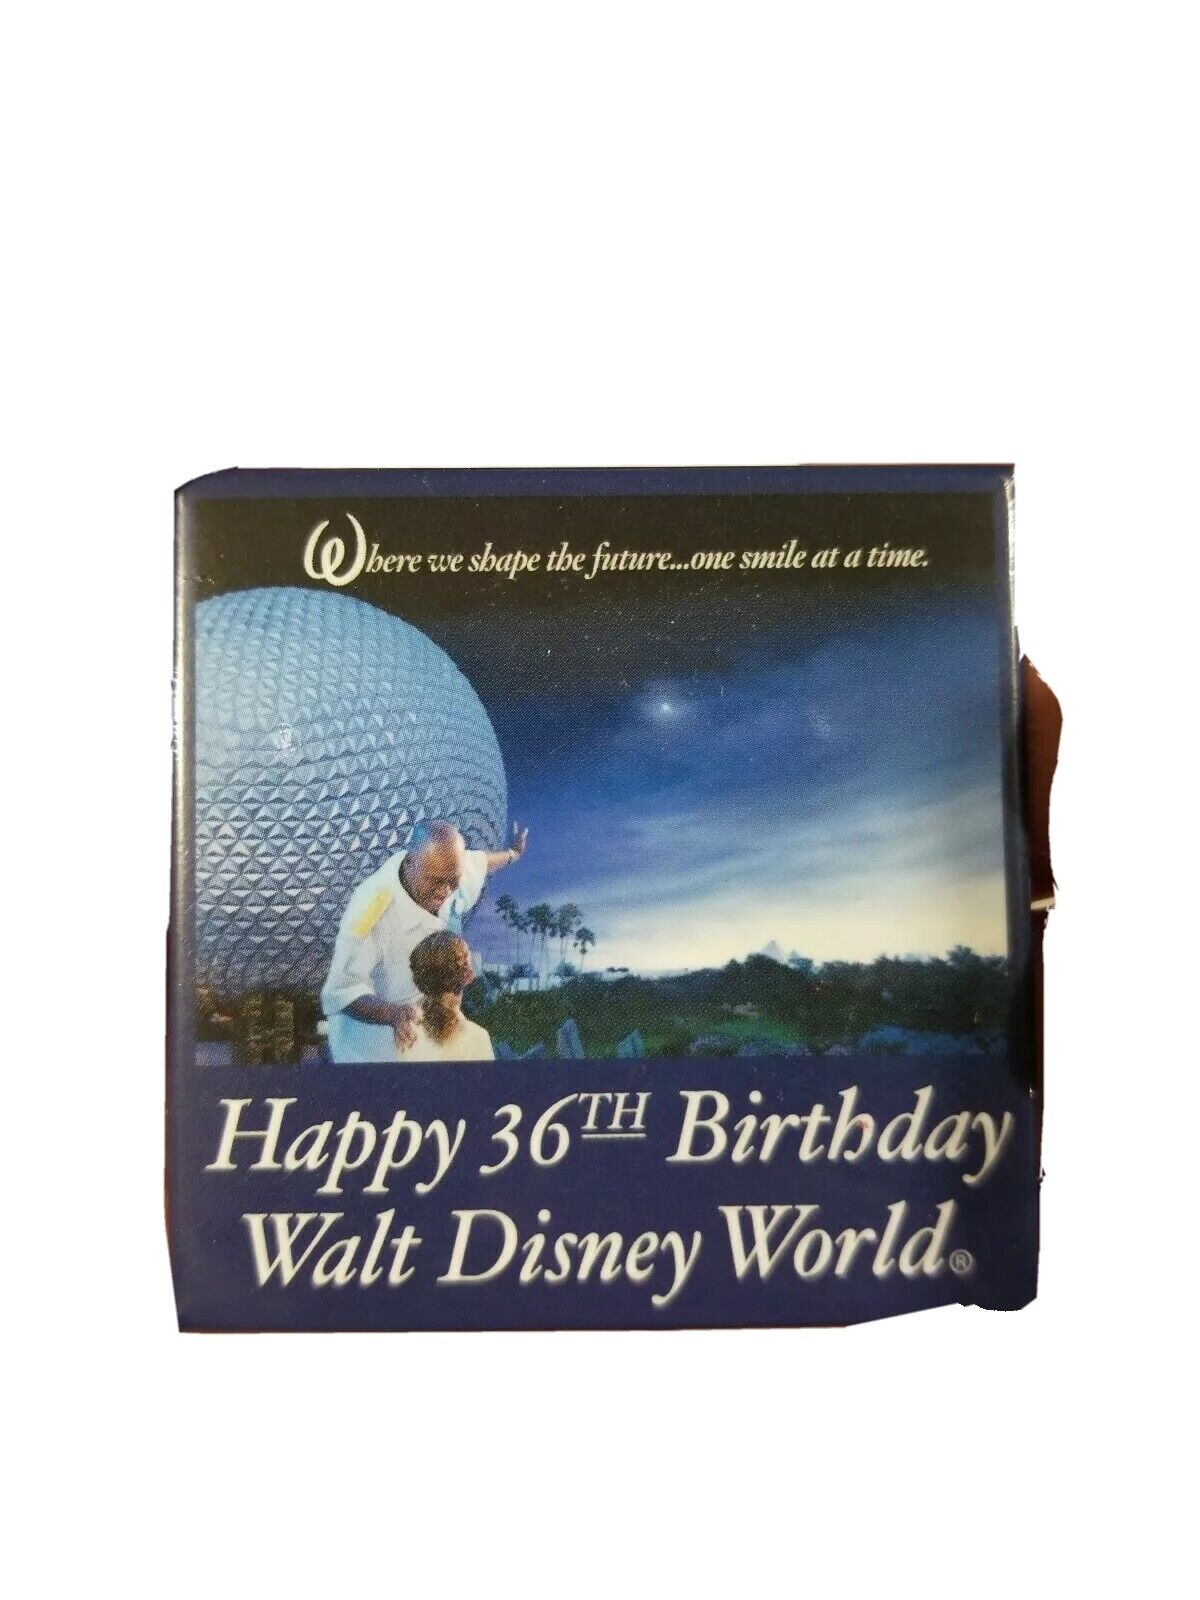 Happy 36th Birthday Walt Disney World Button Pin Shape Future 1 Smile at a Time